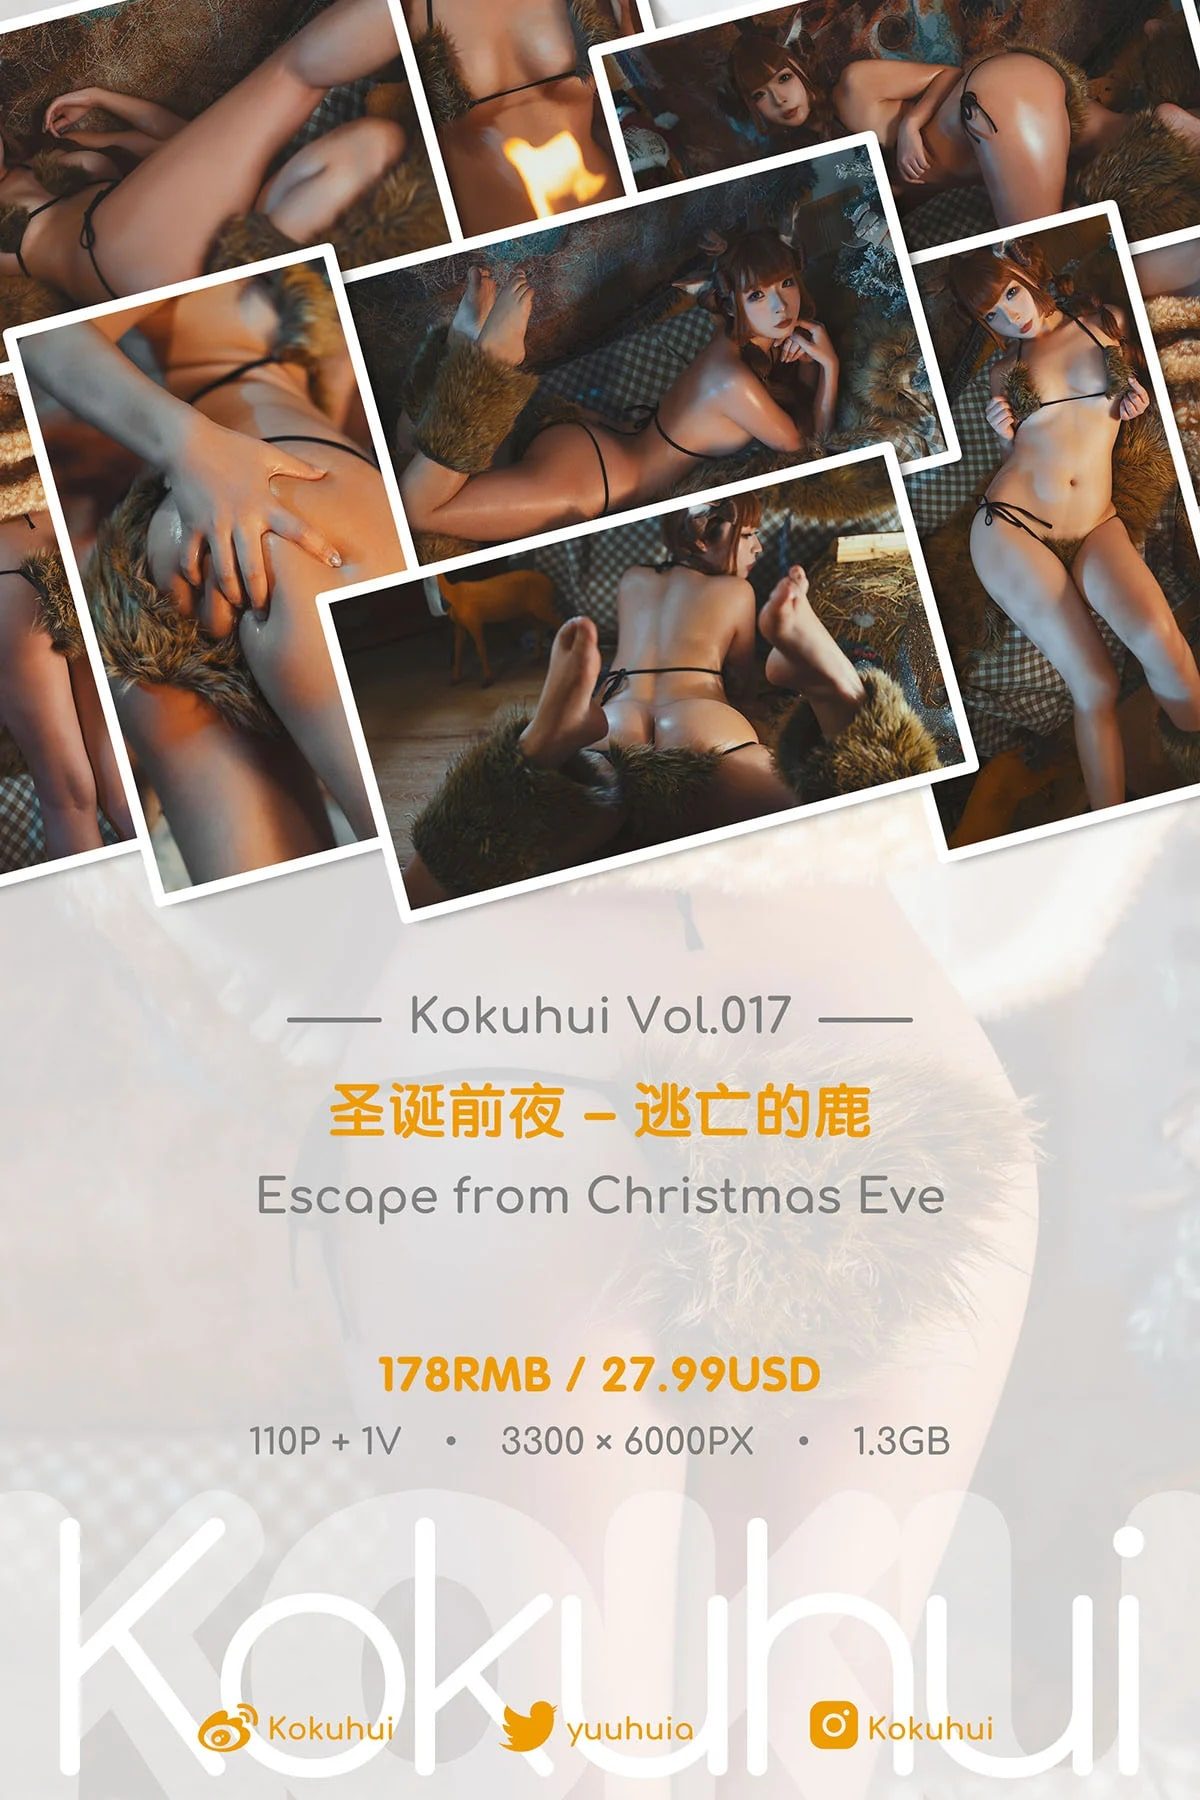 Coser@Kokuhui Vol 017 Escape from Christmas Eve 0002 3205302180.jpg